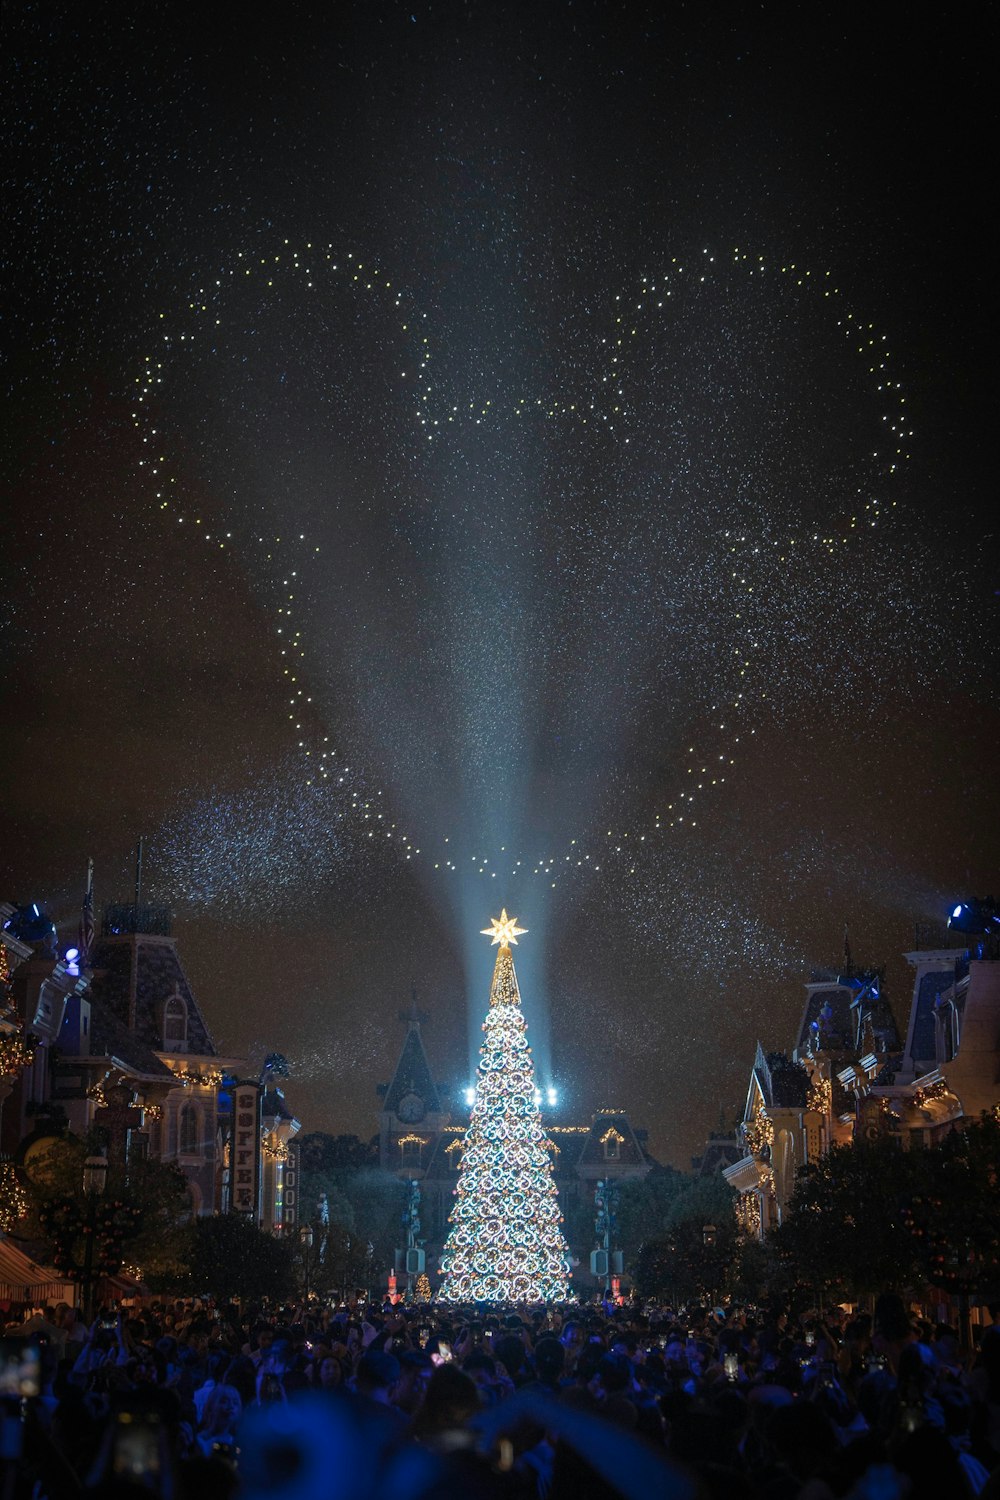 a large christmas tree is lit up in front of a crowd